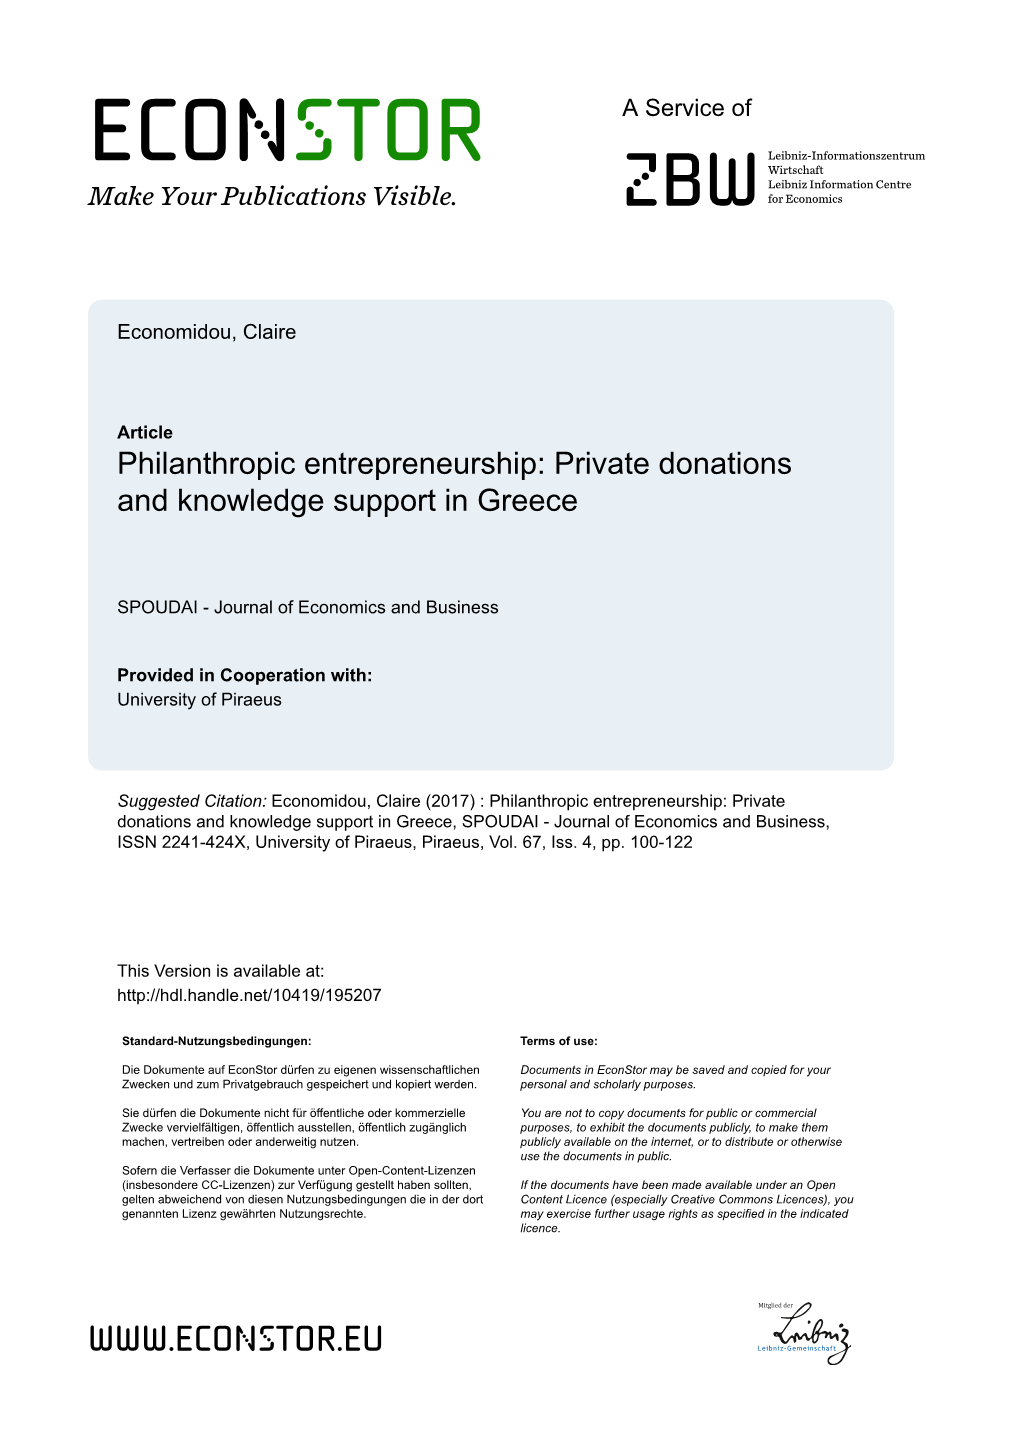 Philanthropic Entrepreneurship: Private Donations and Knowledge Support in Greece